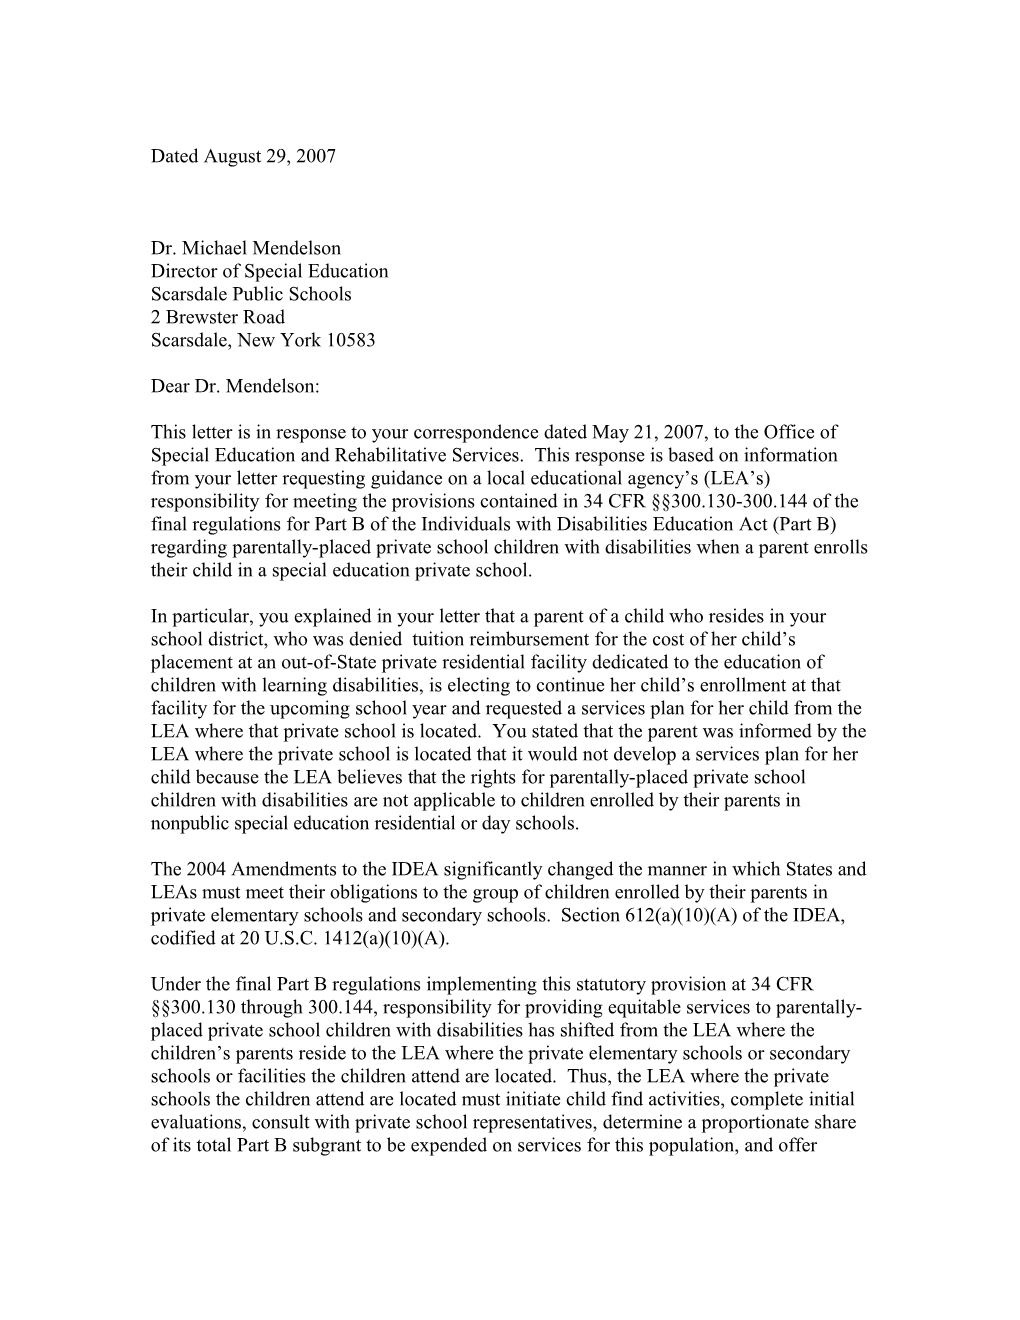 Mendelson Letter Dated 08/29/07 Re: Children with Disabilities Enrolled by Their Parents